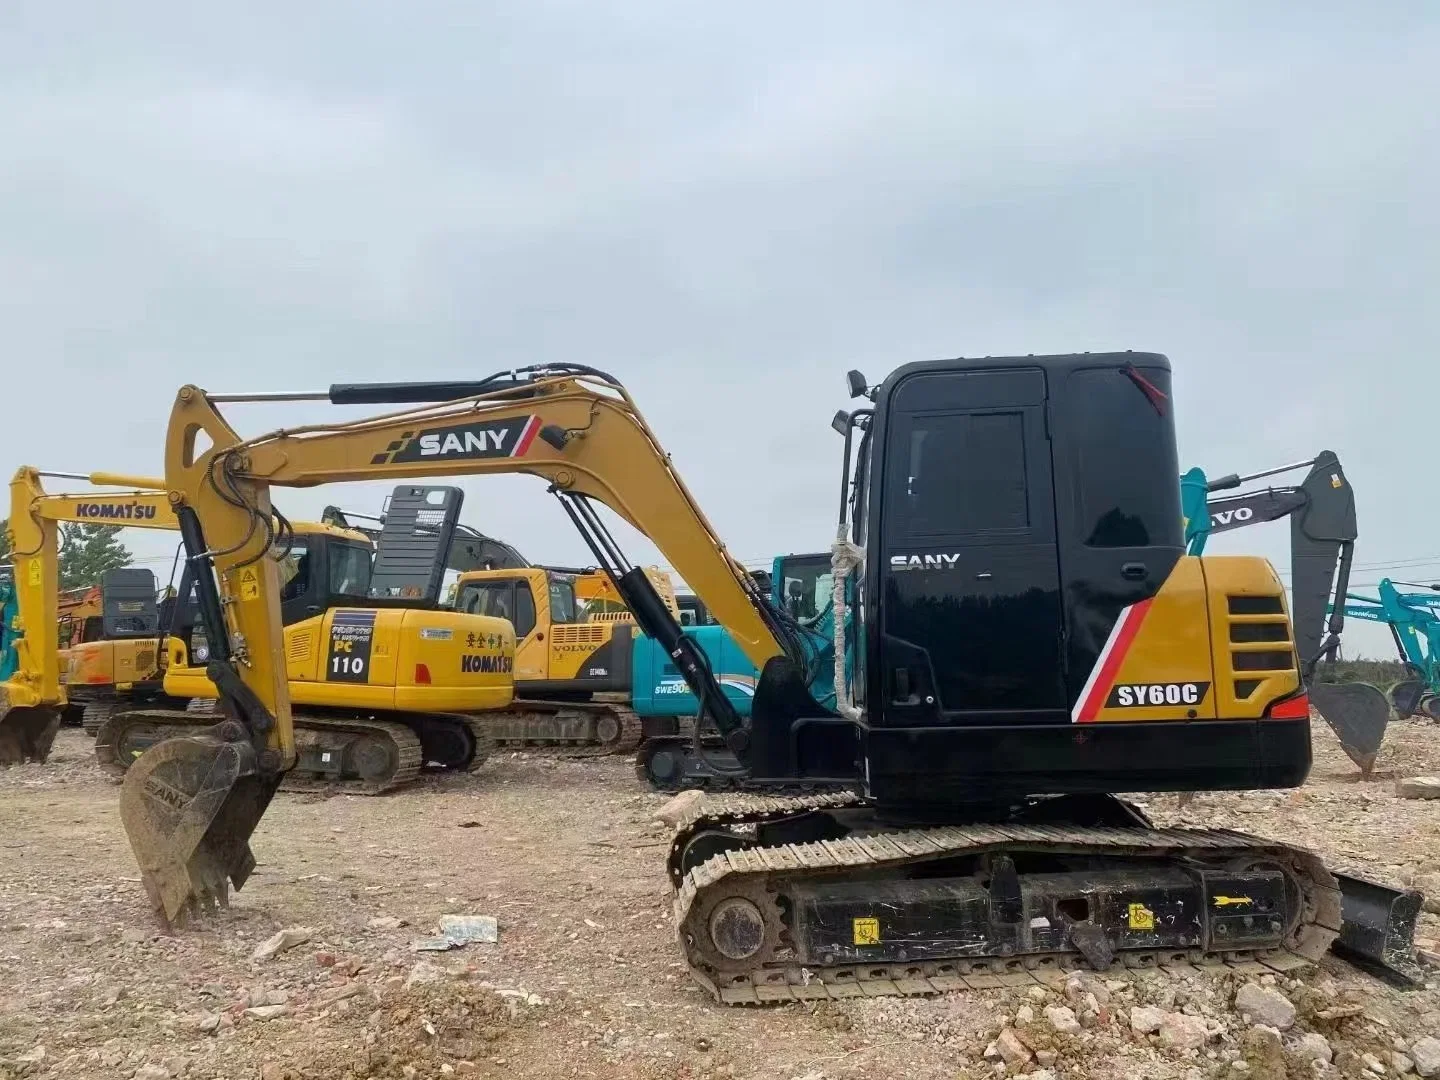 Used Sanyi Sy215c Excavator Excavadora Sanyi Sy215 Sy215-9 Sy225 Sy235 Sy205 Excavator Earthmoving Machinery Hot Sale in Stock